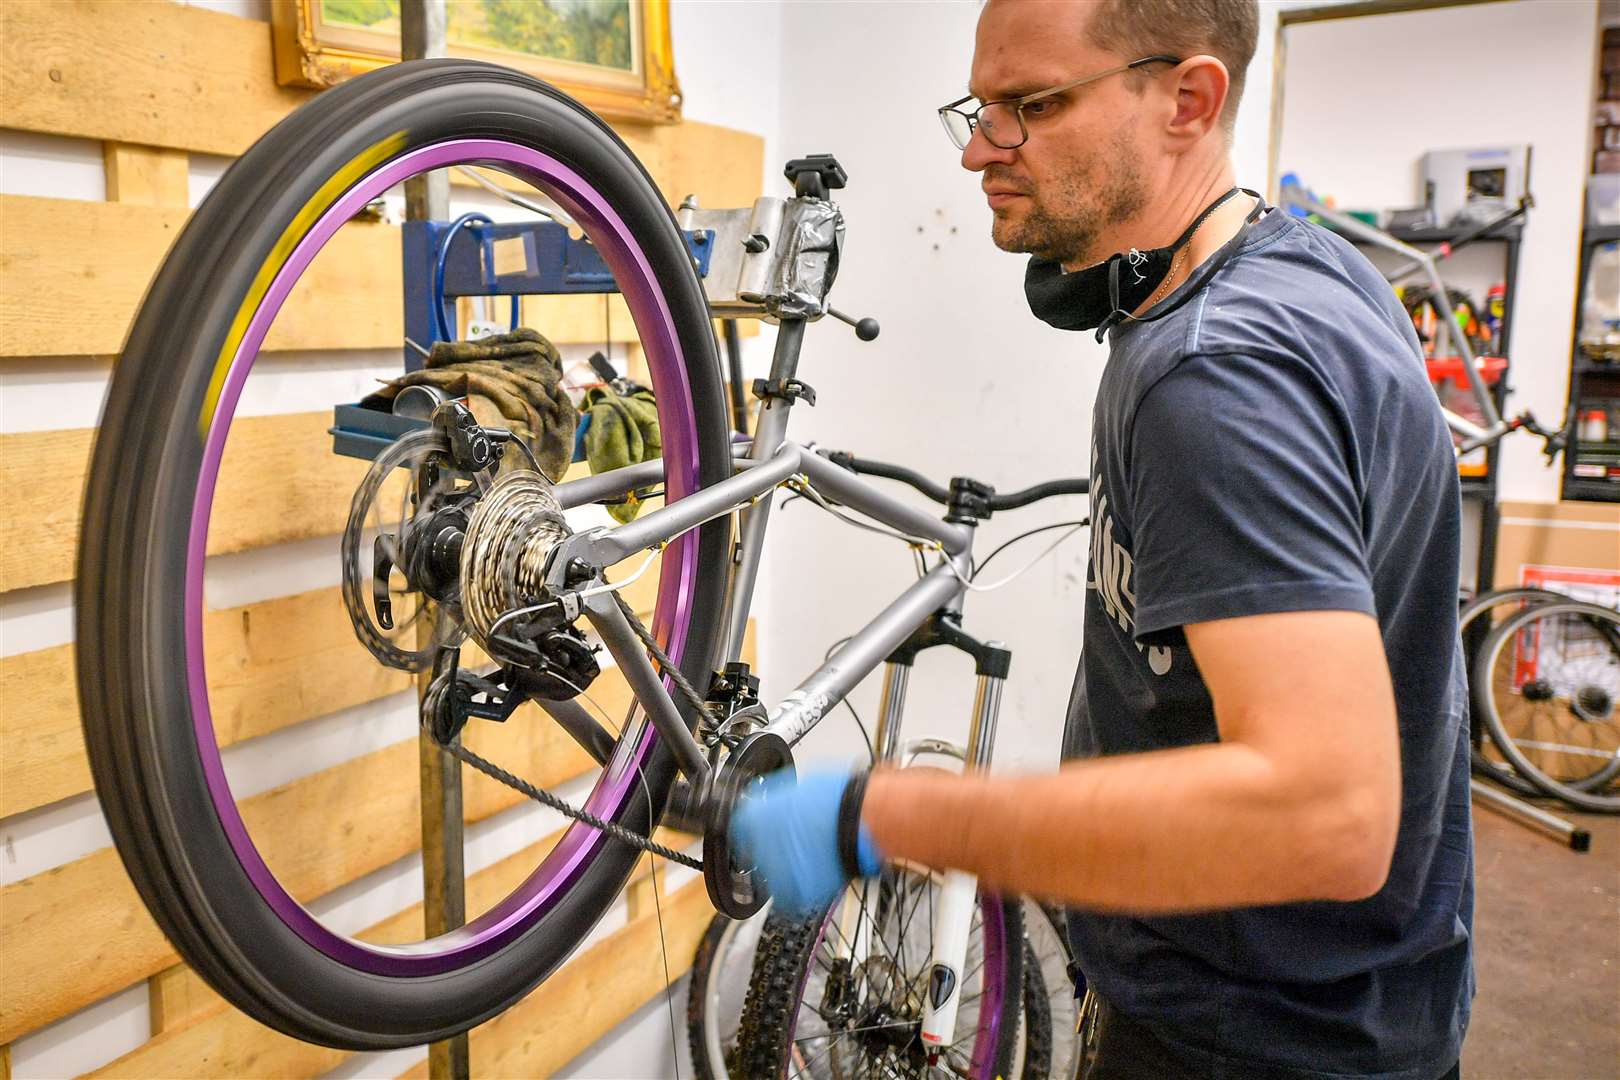 Andrew Bebesi, owner of bike repair service Briscycle, is participating in the Government’s bike repair scheme (Ben Birchall/PA)